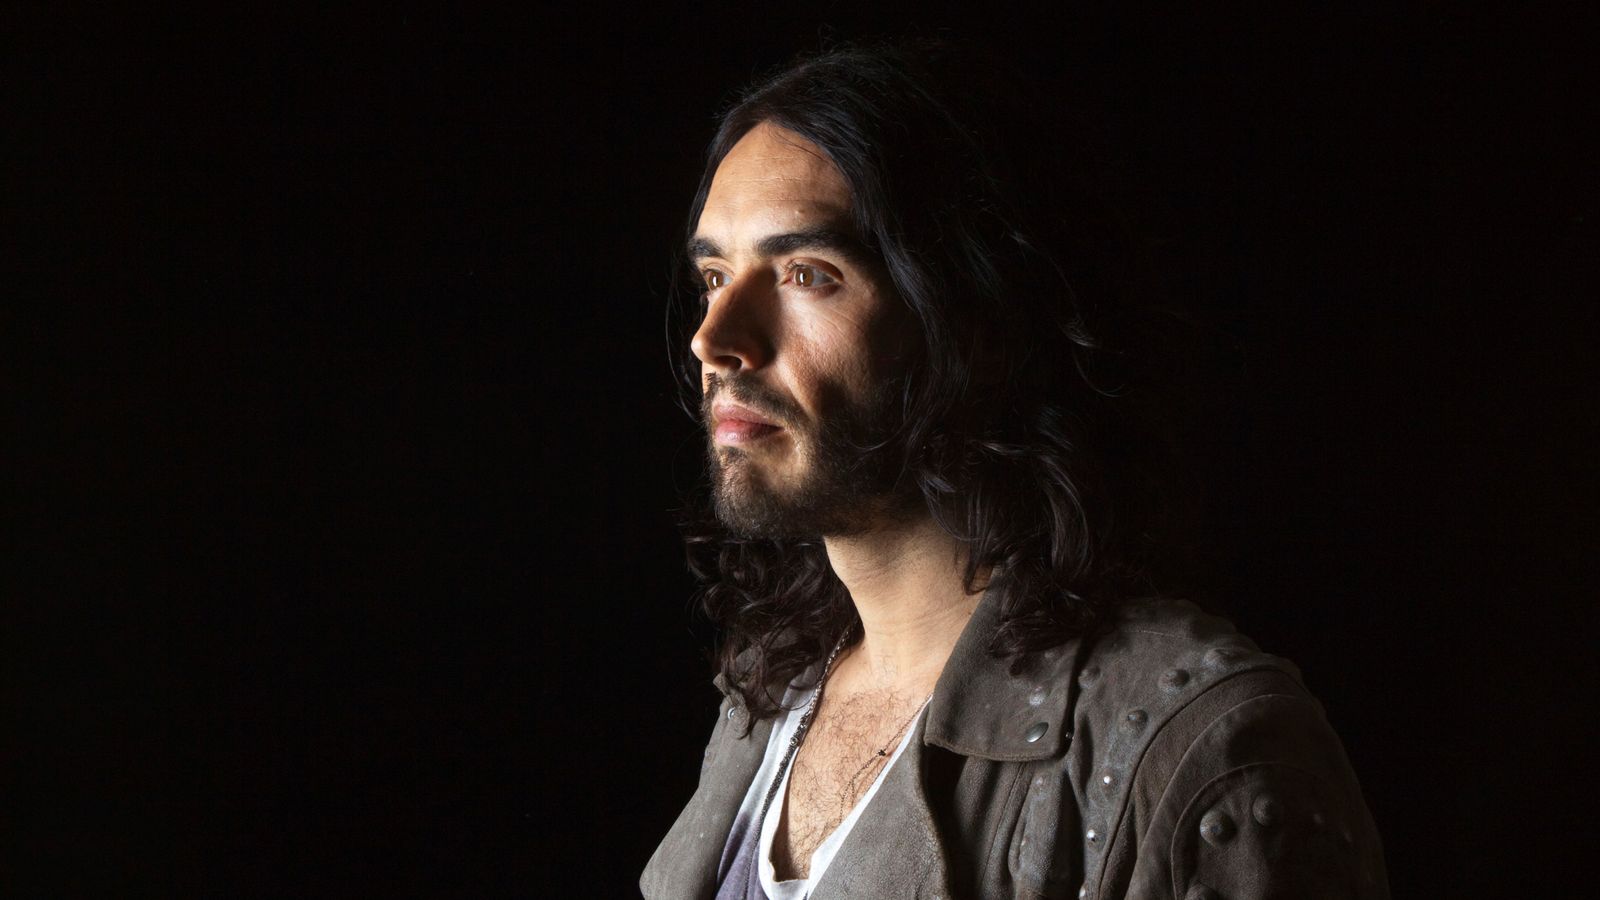 Russell Brand: Men more likely than women to think sex between 16-year-old and older partner is okay